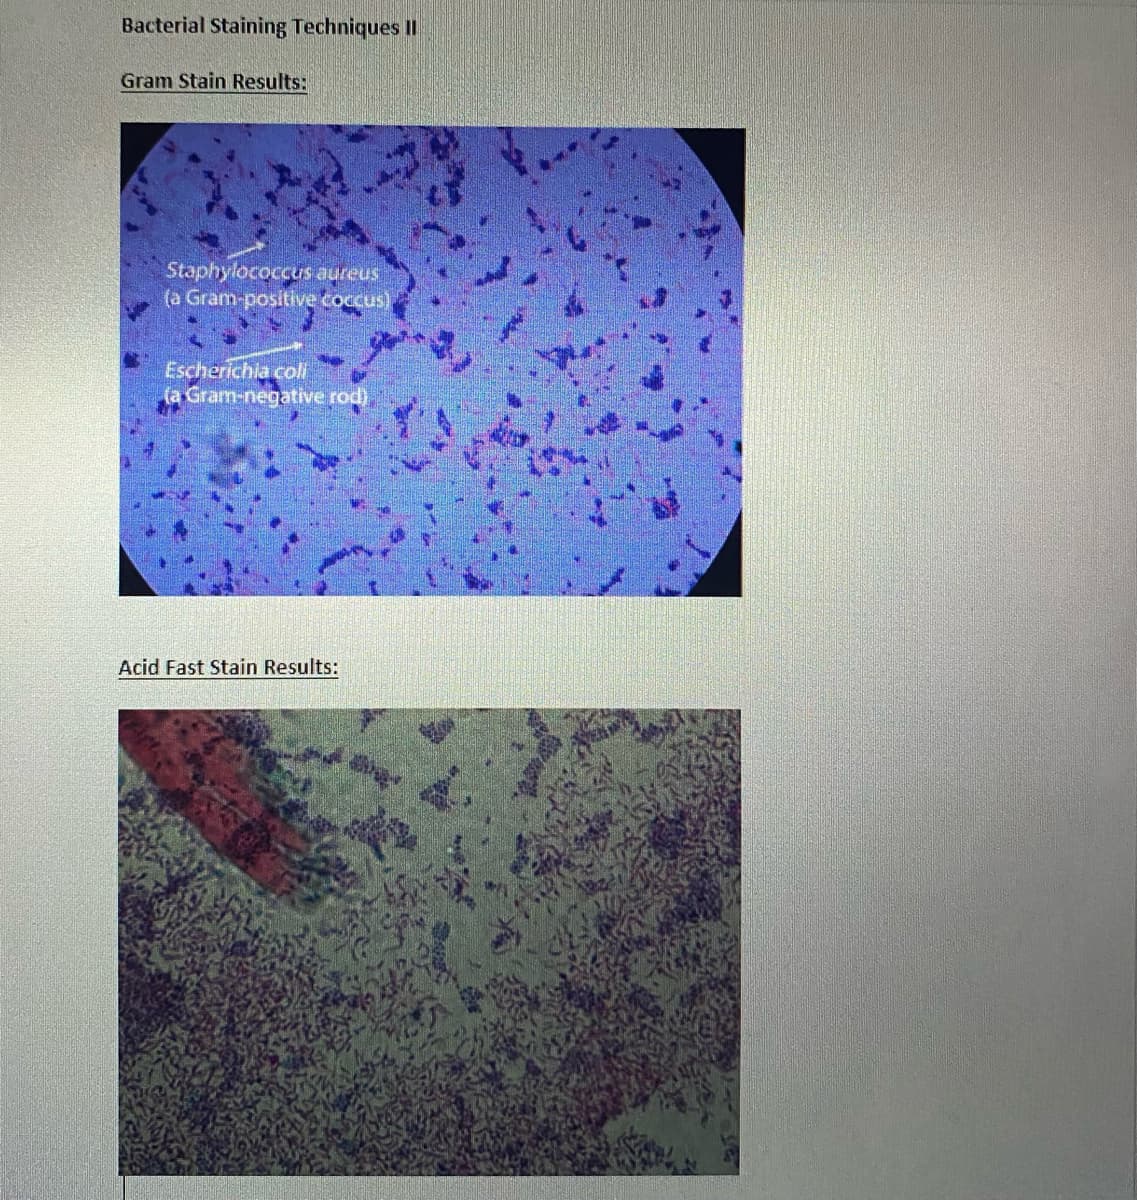 Bacterial Staining Techniques iI
Gram Stain Results:
Staphylococcus aureus
(a Gram-positive coccus)
Escherichia coli
(a Gram-negative rod)
Acid Fast Stain Results:
